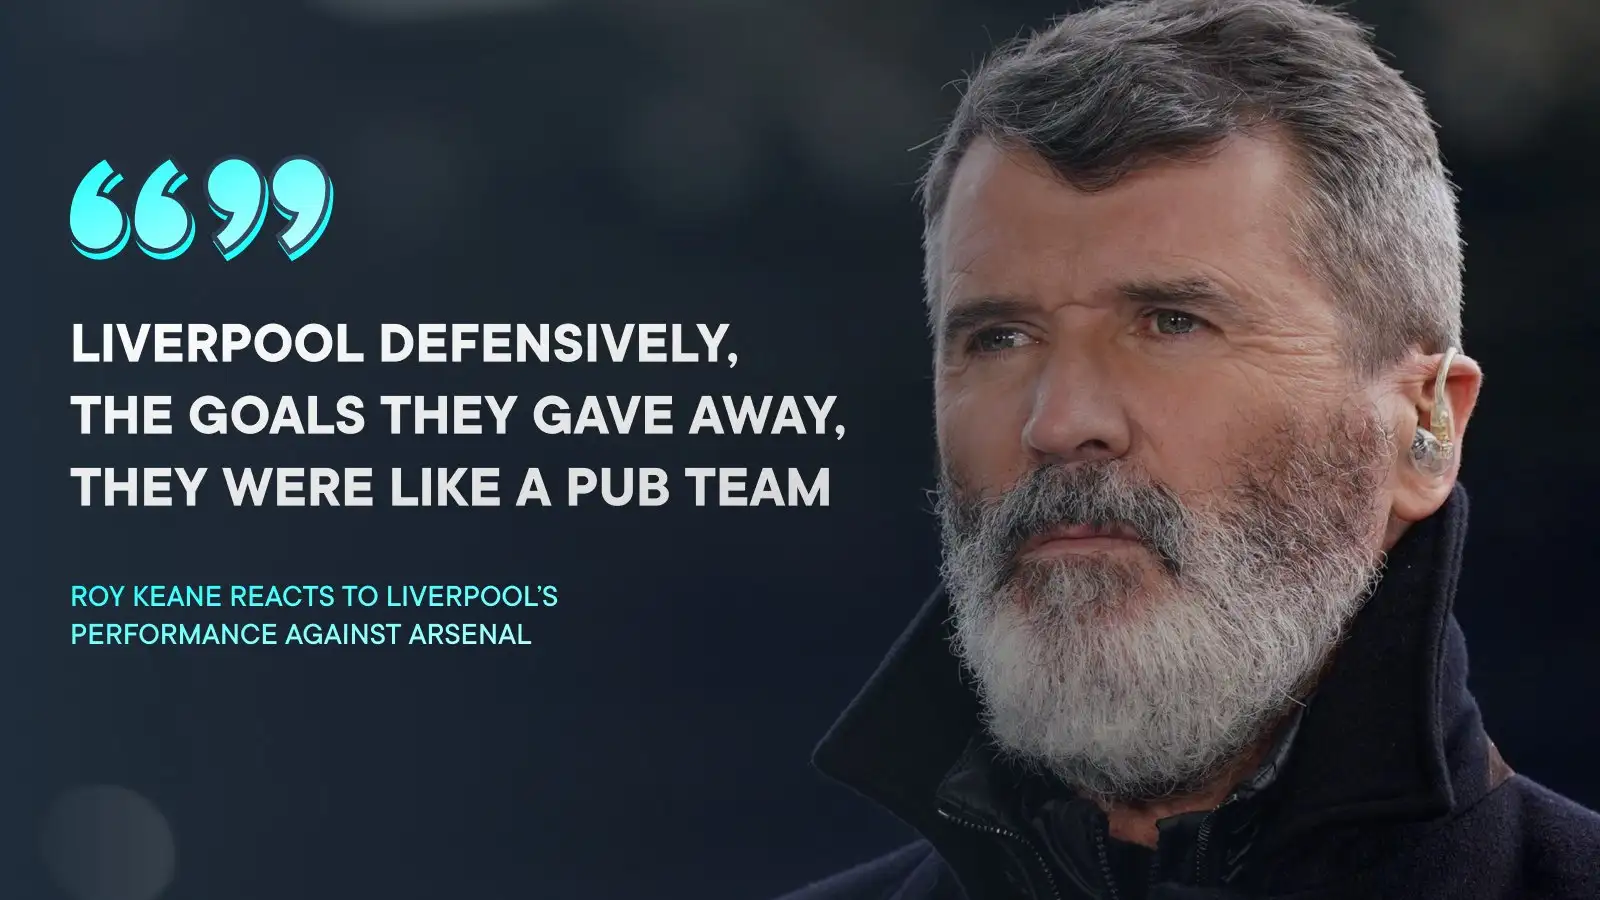 Roy Keane owns criticised Liverpool